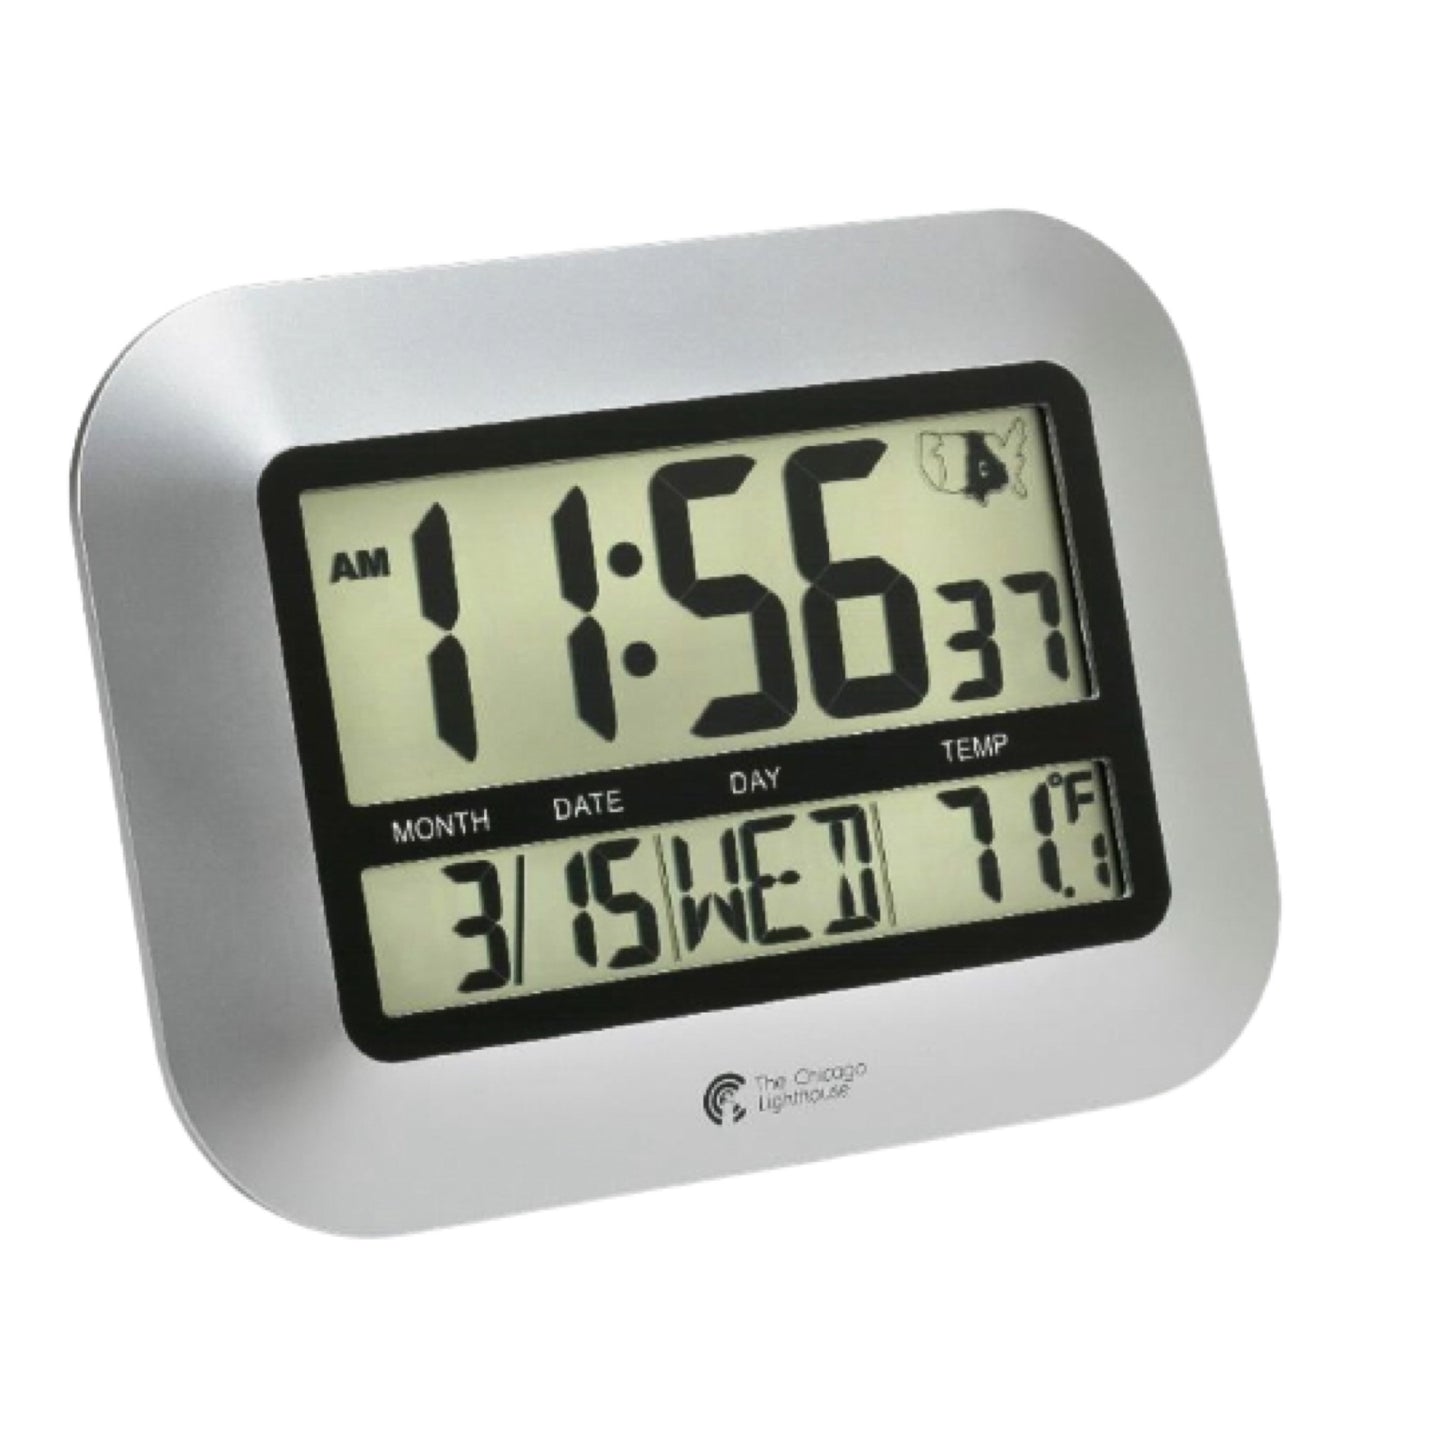 The Silver Digital Atomic Radio-Controlled Clock can be mounted on a wall or be placed on a desk.  The large LED displays sharp, crisp black numbers which are easy to be viewed by someone who is visually impaired.